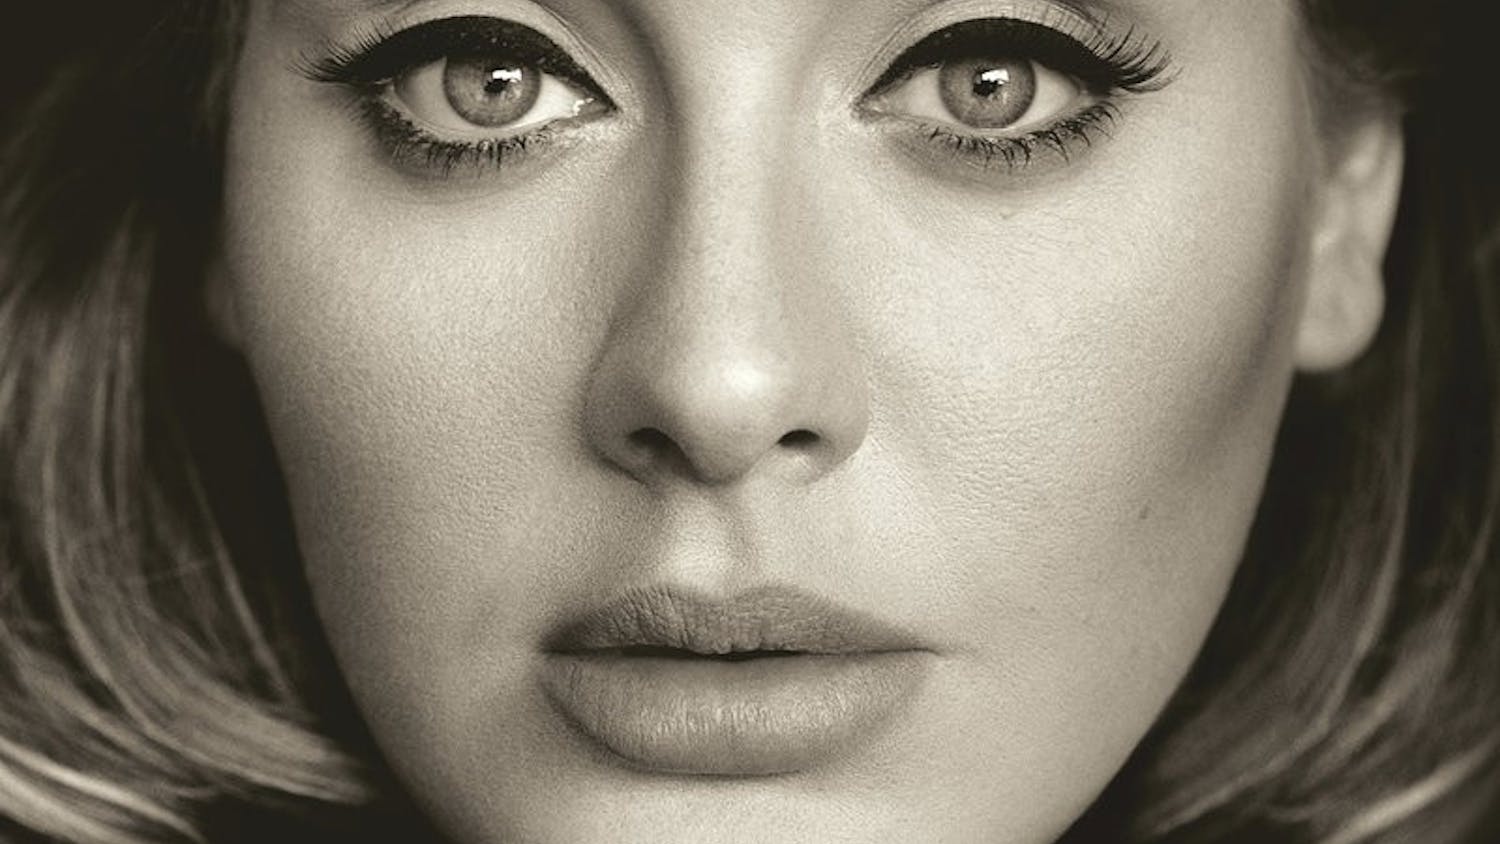 Adele's new album is mature, thought-provoking and sincere. 